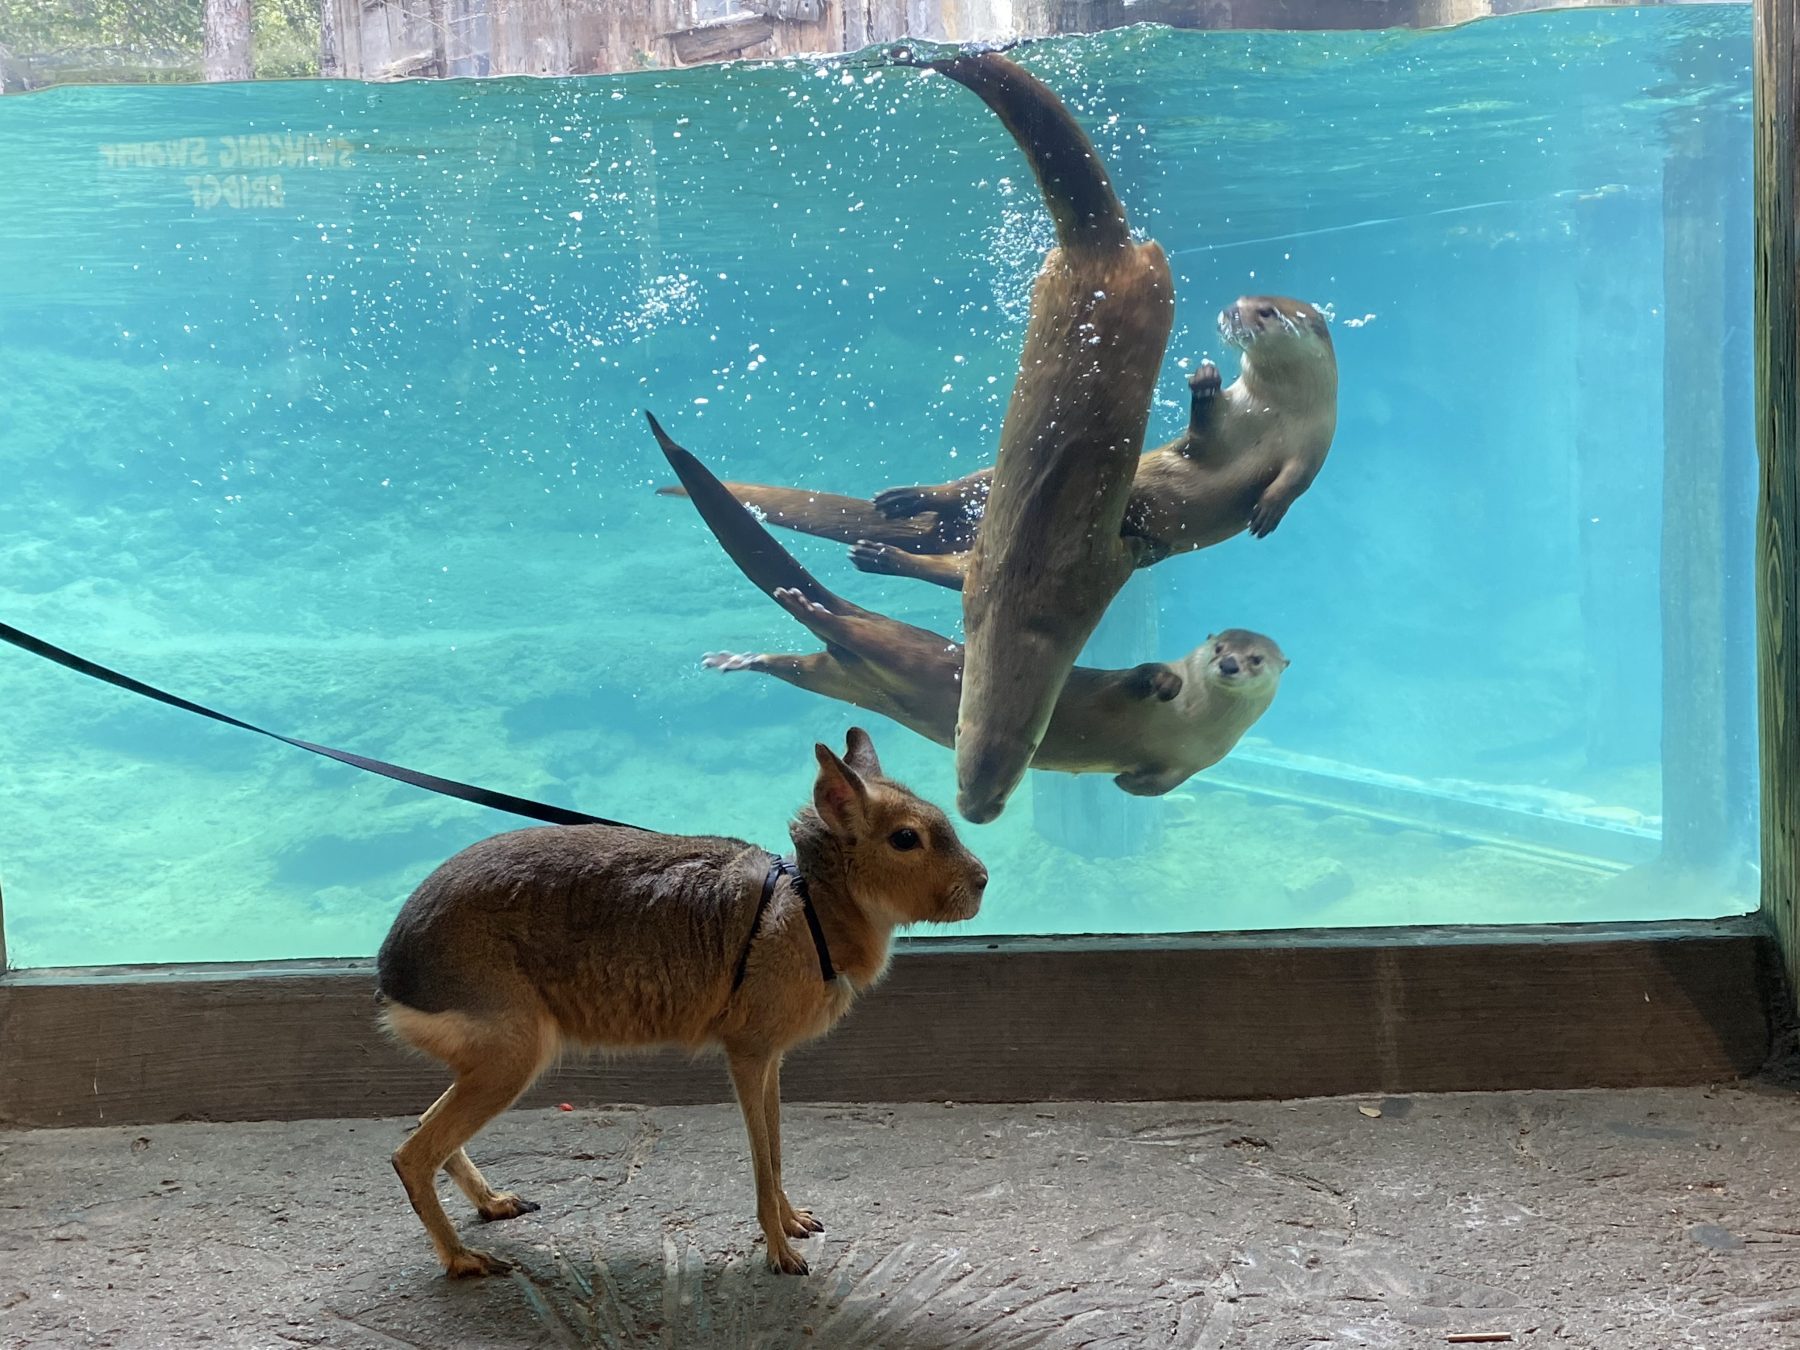 A Patagonian mara visits otters at the Fort Worth Zoo. Photo courtesy Fort Worth Zoo.